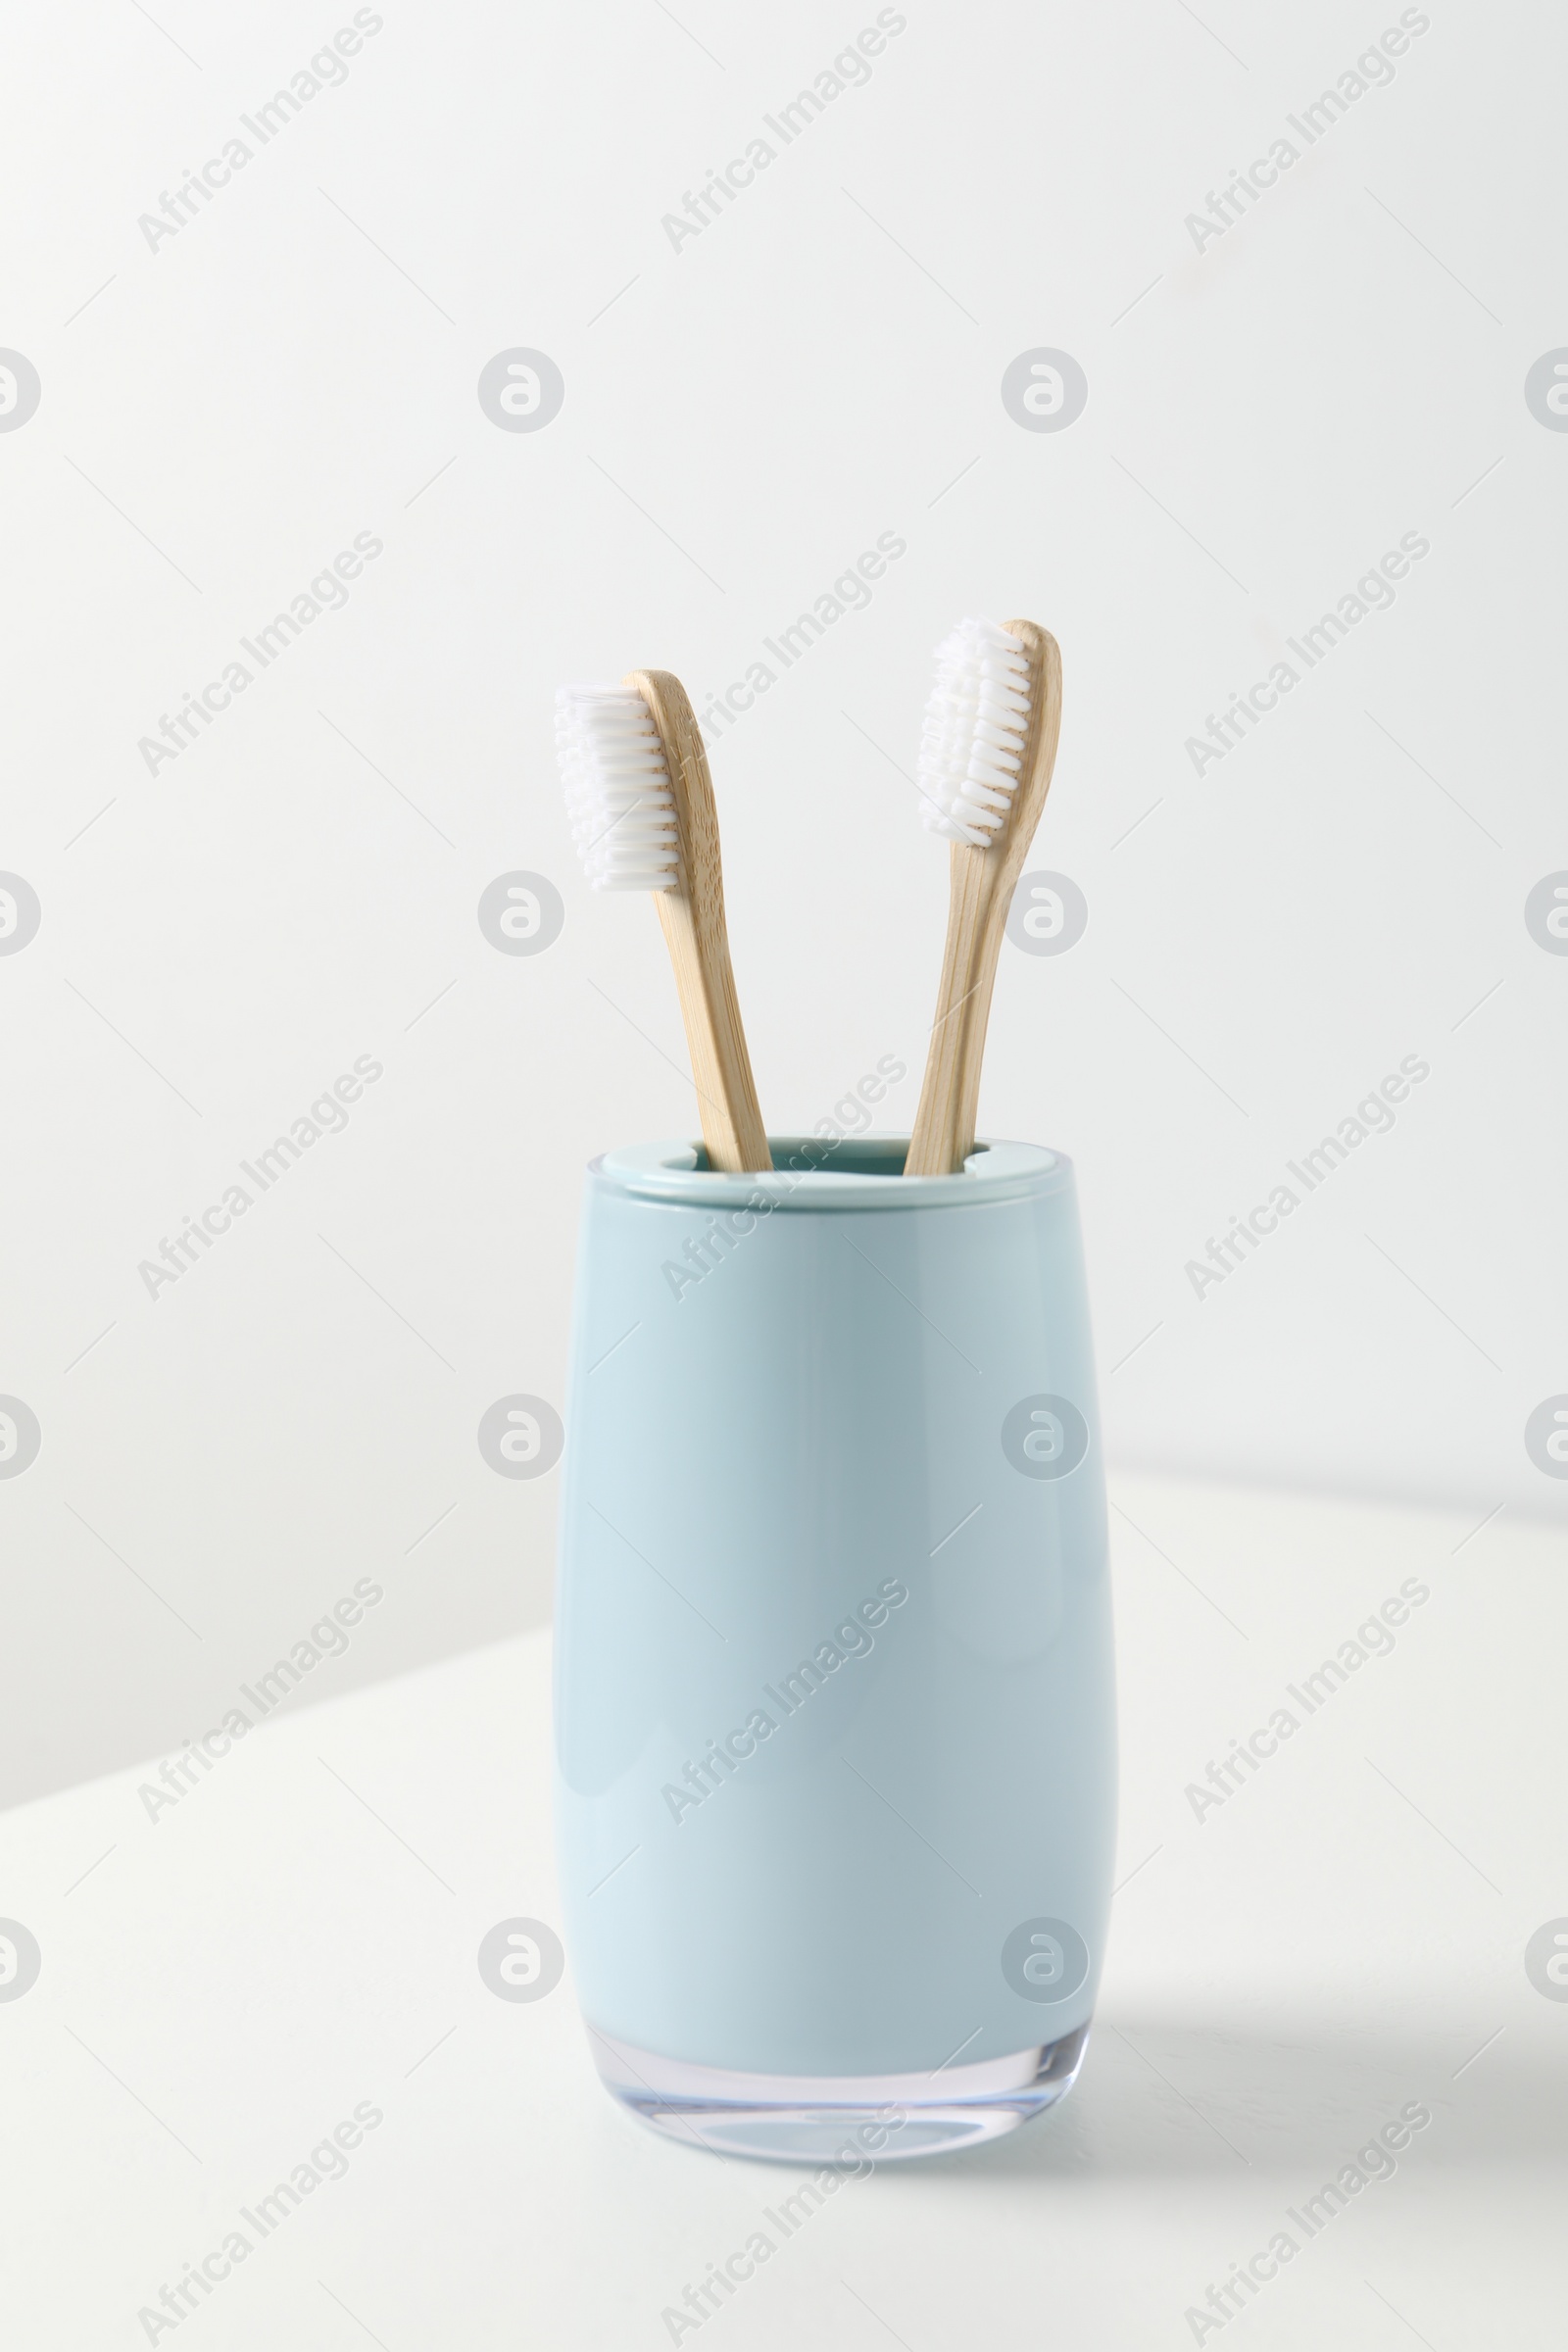 Photo of Bamboo toothbrushes in holder on white table